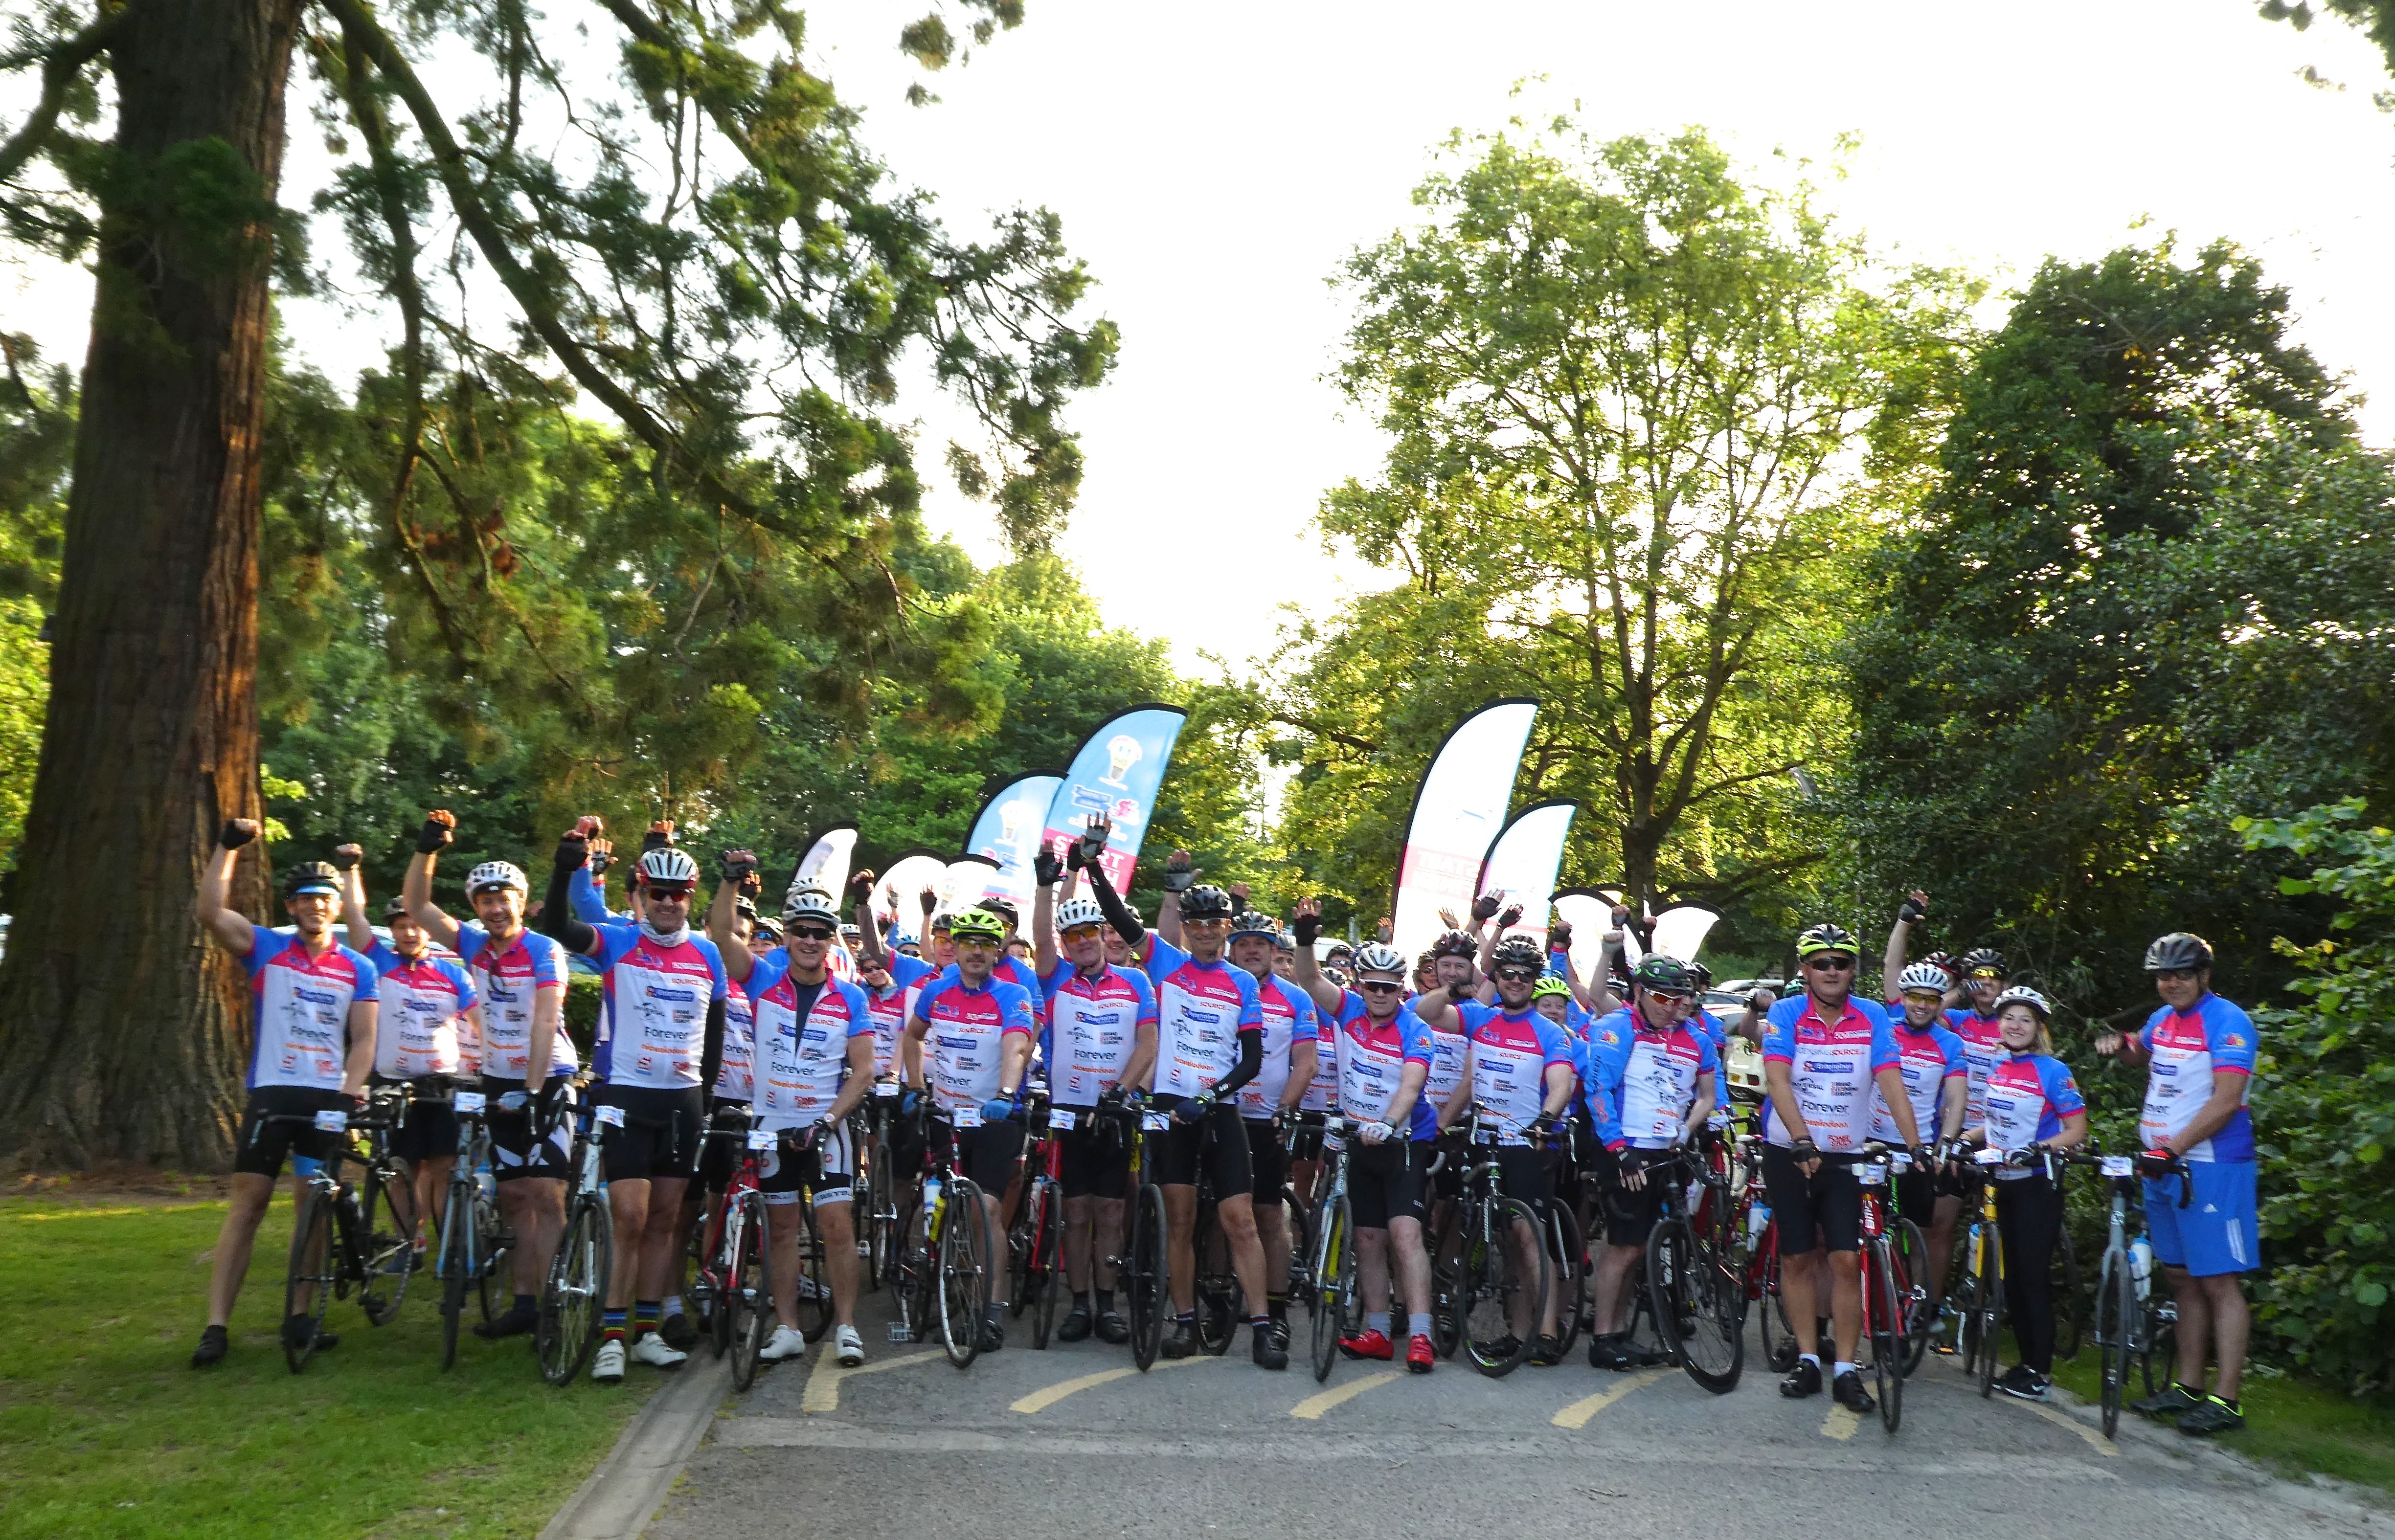 Above: The Bristol to Dublin bike ride raised £230,000 for The Light Fund. 